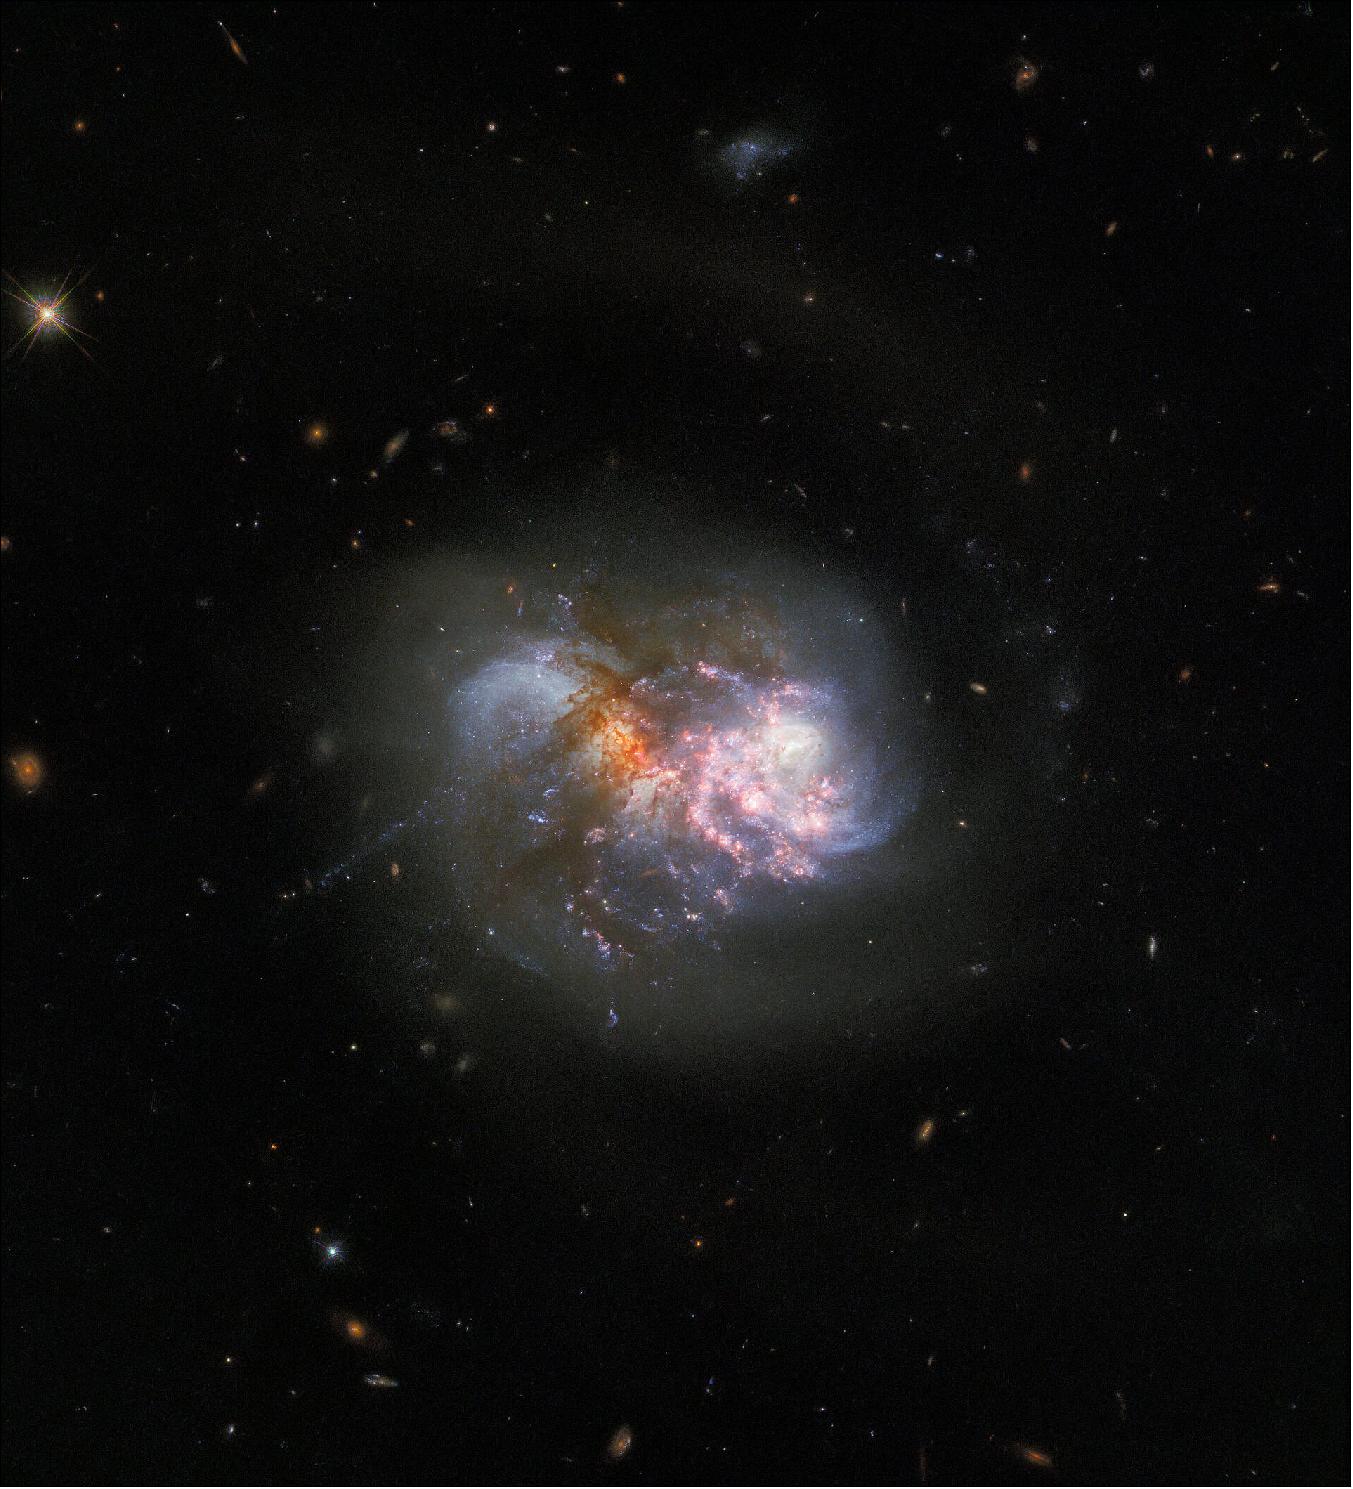 Figure 74: This interacting pair of galaxies is a familiar sight; Hubble captured IC 1623 in 2008 using two filters at optical and infrared wavelengths using the Advanced Camera for Surveys. This new image incorporates new data from the Wide Field Camera 3, and combines observations taken in eight filters spanning infrared to ultraviolet wavelengths to reveal the finer details of IC 1623. Future observations of the galaxy pair with the NASA/ESA/CASA James Webb Space Telescope will shed more light on the processes powering extreme star formation in environments such as IC 1623 (image credit: ESA/Hubble & NASA, R. Chandar; CC BY 4.0)